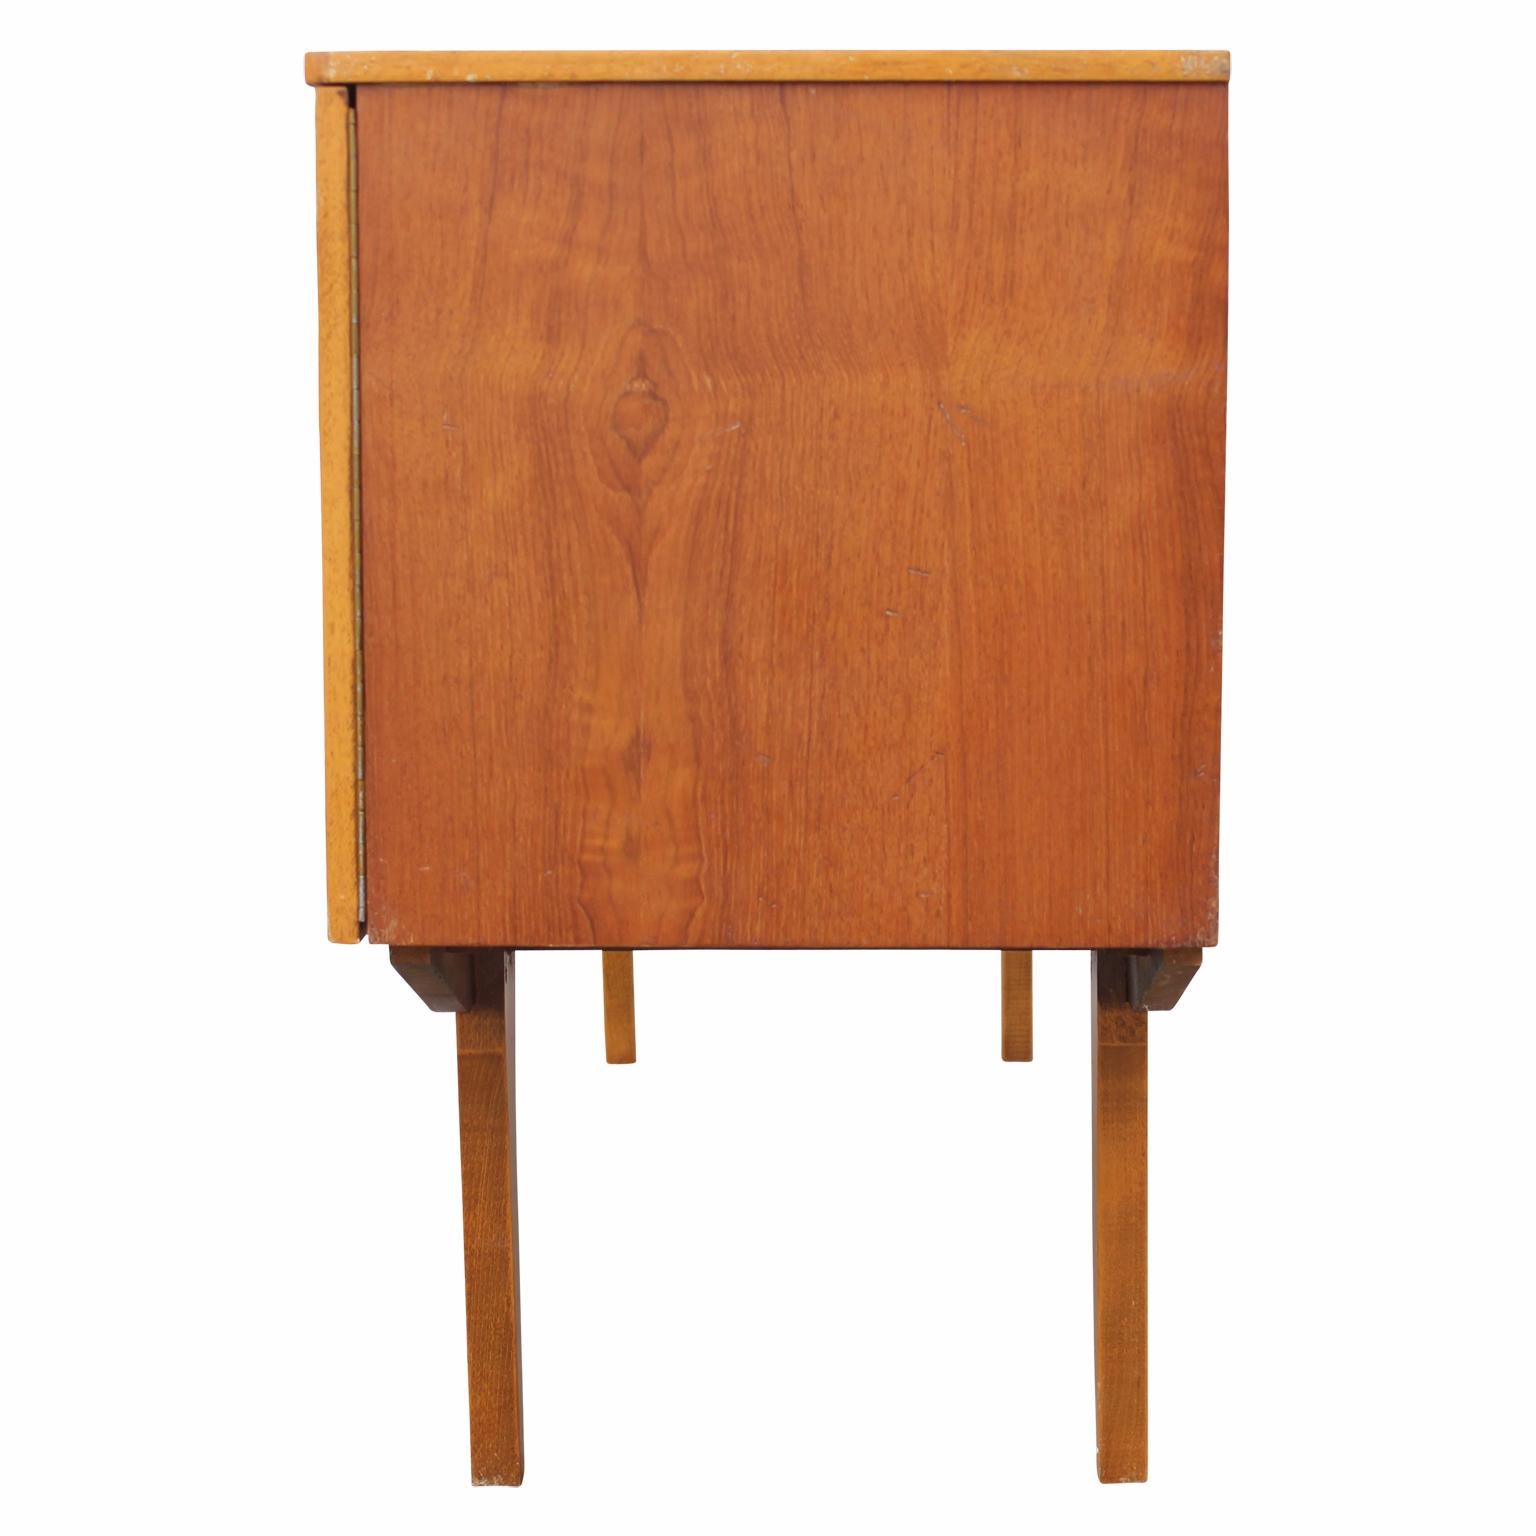 Mid-Century Modern Danish Style Teak Sideboard or Credenza with Wooden Handles 4